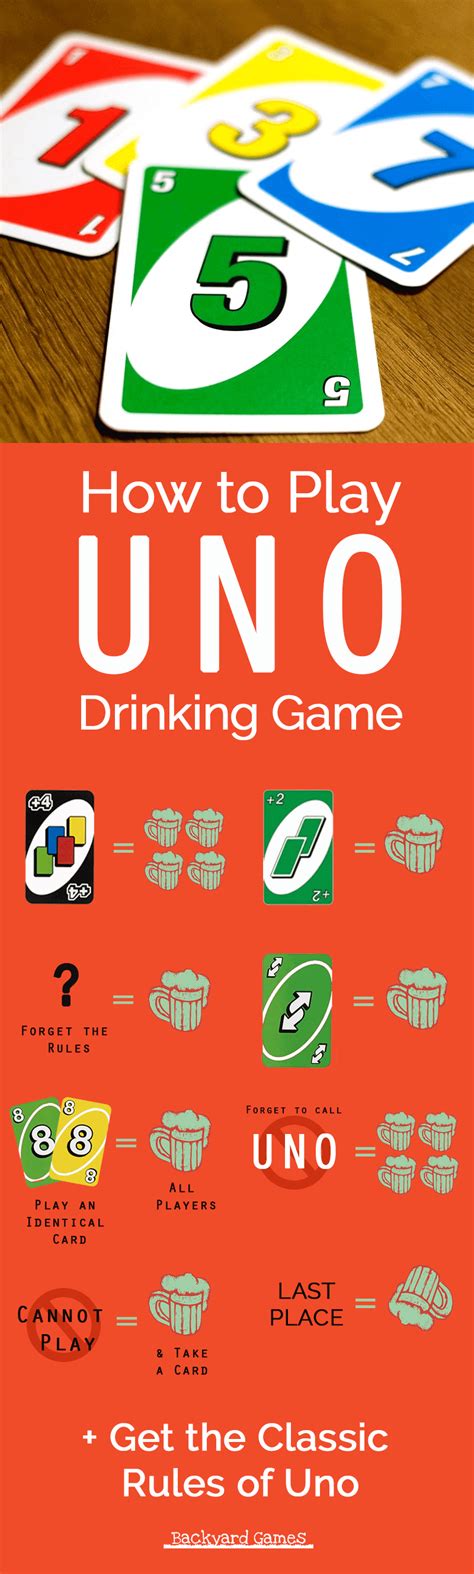 Uno (/ ˈ uː n oʊ /; from Spanish and Italian for 'one'), stylized as UNO, is a proprietary American shedding-type card game originally developed in 1971 by Merle Robbins in Reading, Ohio, a suburb of Cincinnati, that housed International Games Inc., a gaming company acquired by Mattel on January 23, 1992.. Played with a specially printed deck, …